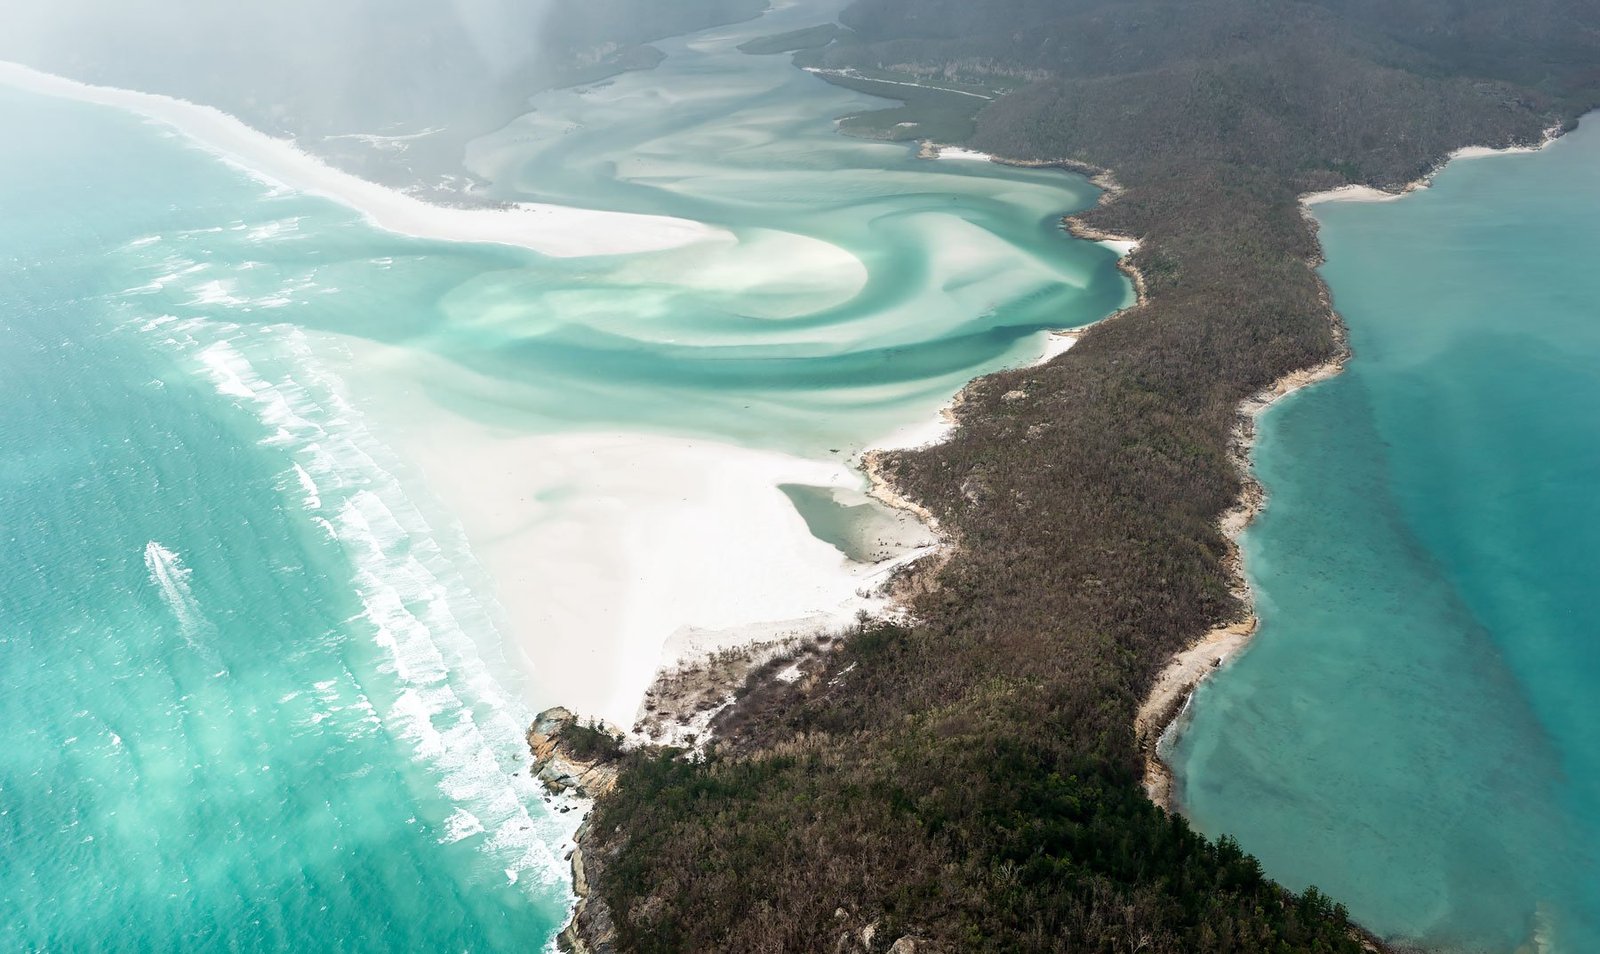 How to see the best of Australia's East Coast in 3 weeks without a car | Scenic flight over the Whitsunday Islands and Great Barrier Reef